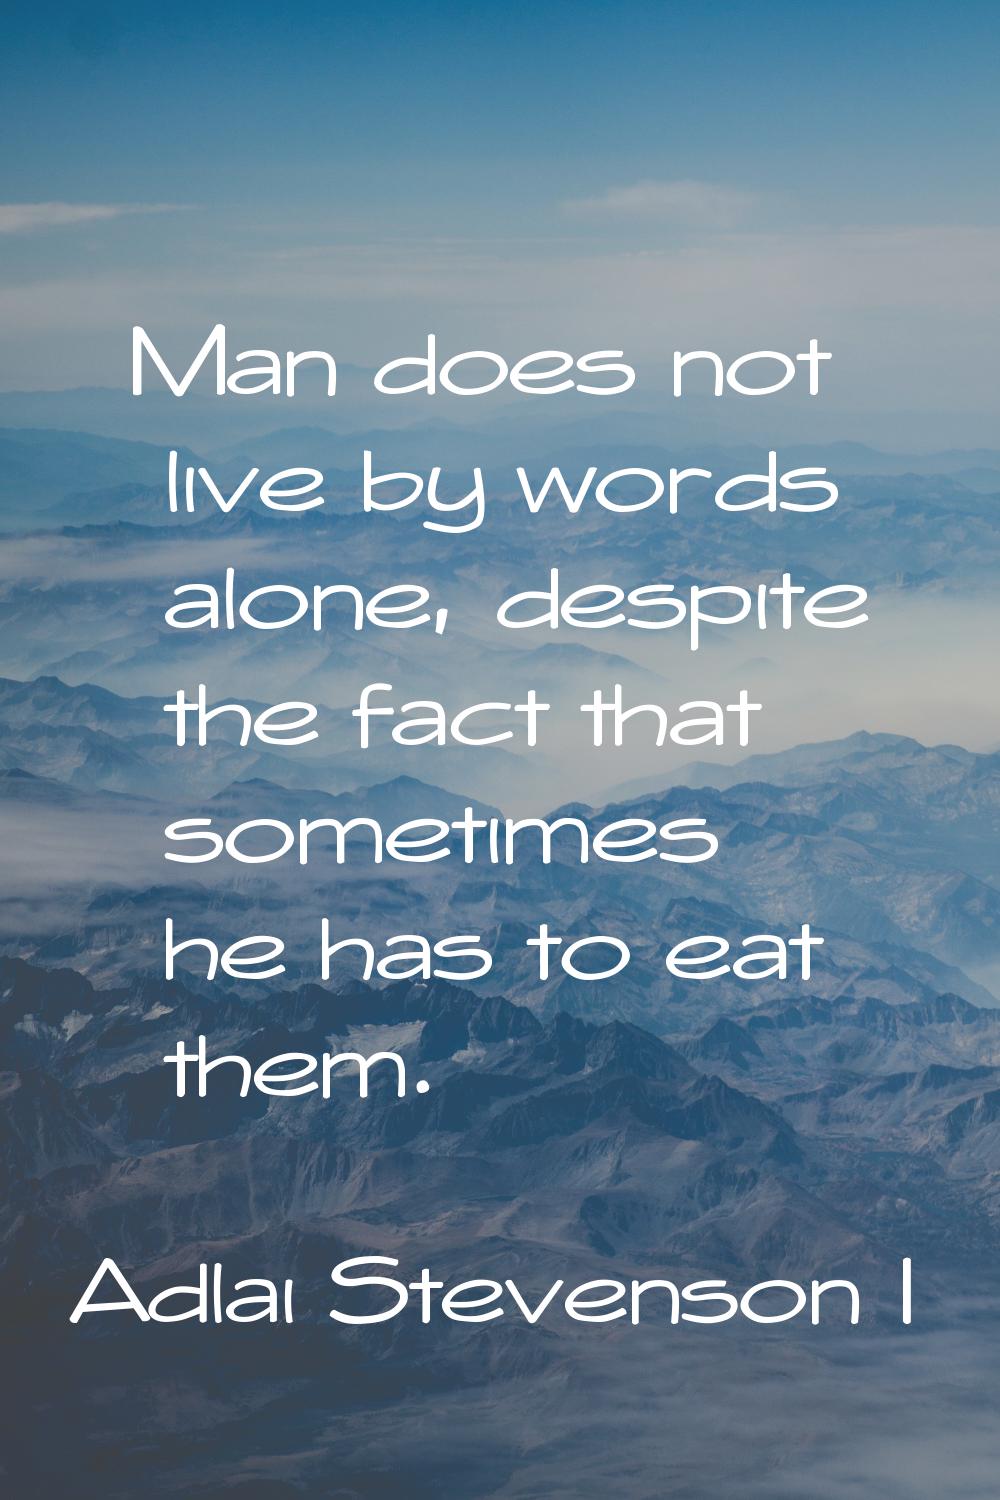 Man does not live by words alone, despite the fact that sometimes he has to eat them.